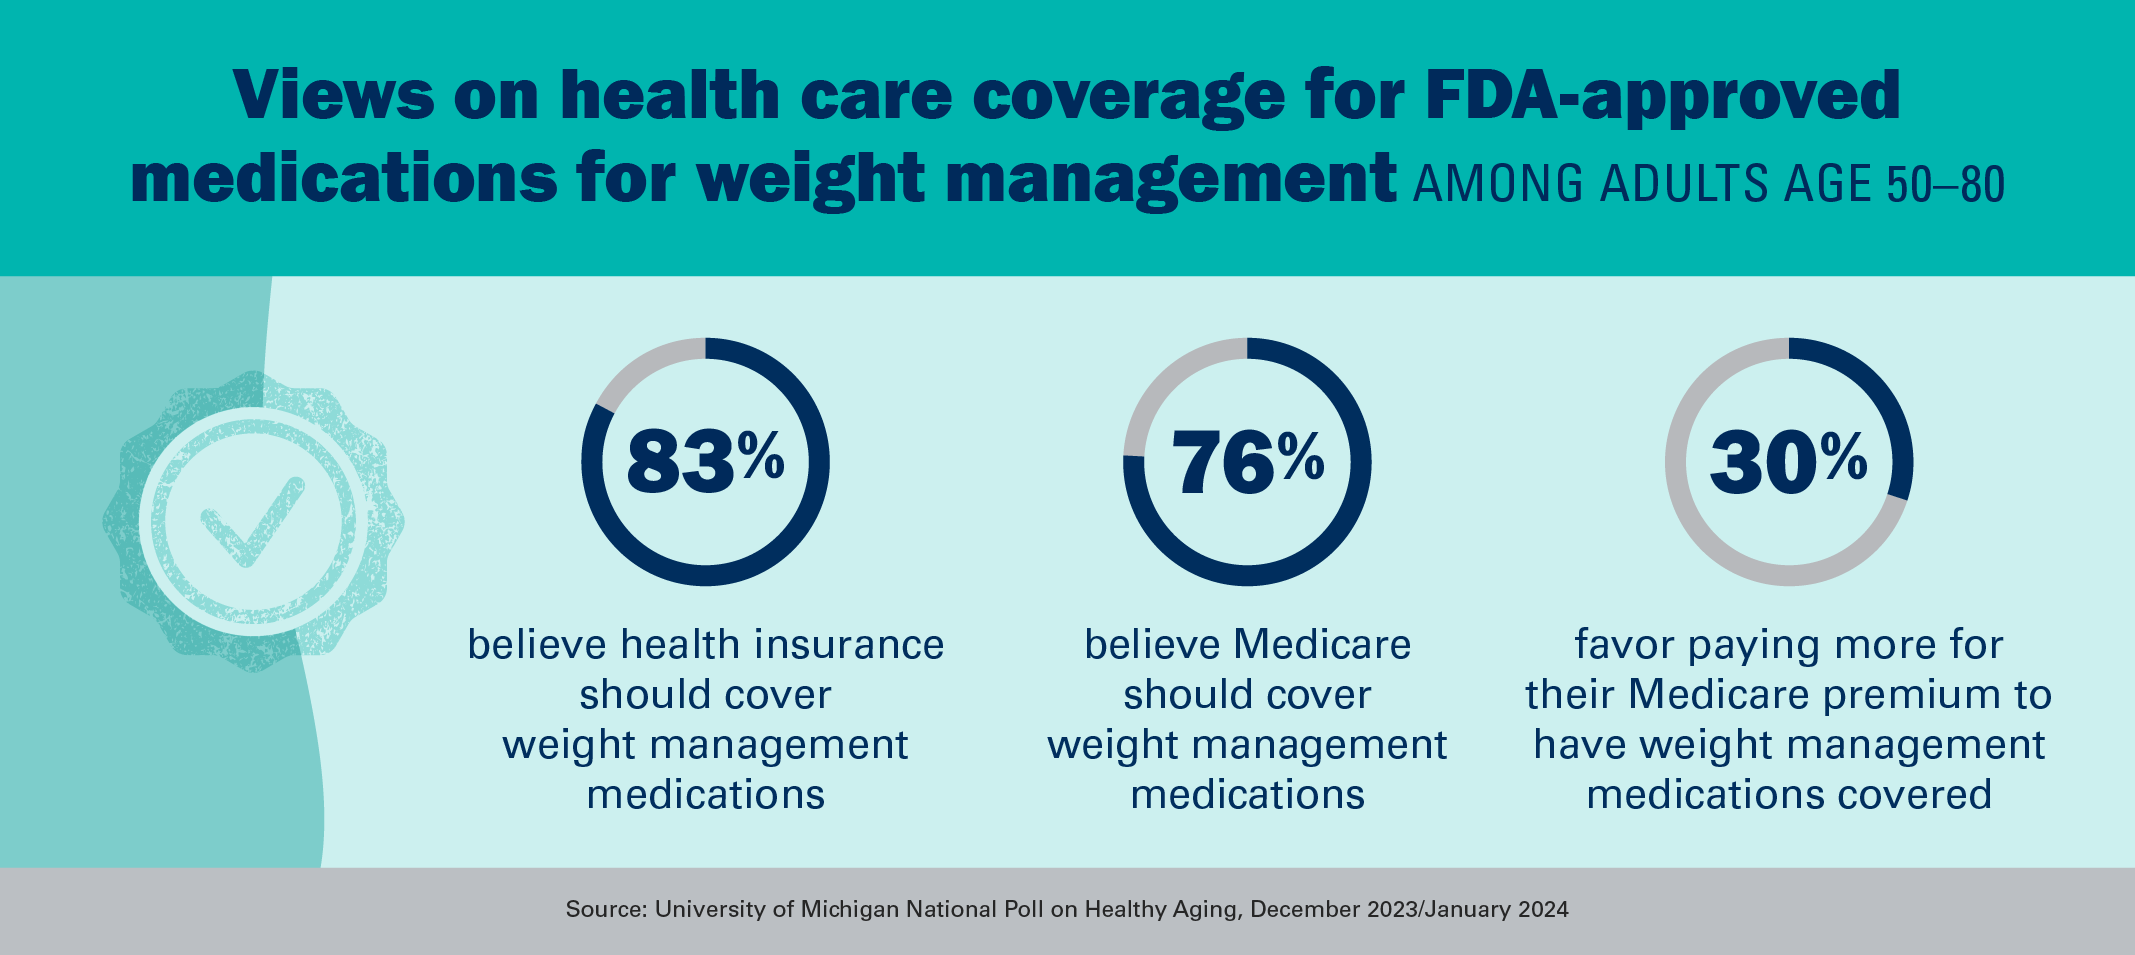 Views on health care coverage for FDA-approved medications for weight management